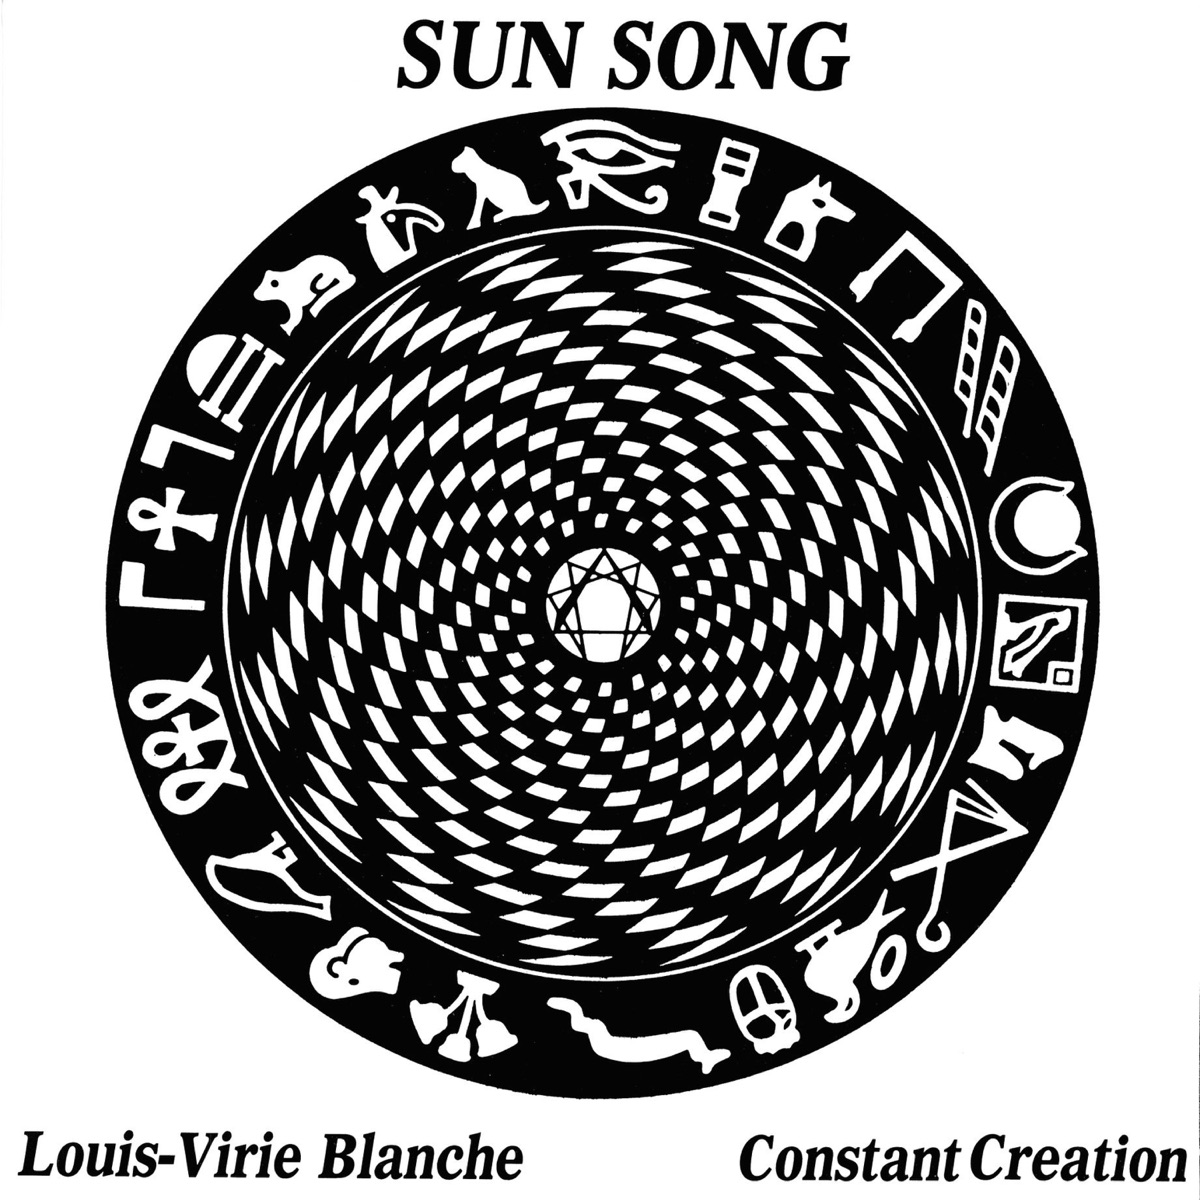 Sun Song by Louis-Virie Blanche & Constant Creation on Apple Music